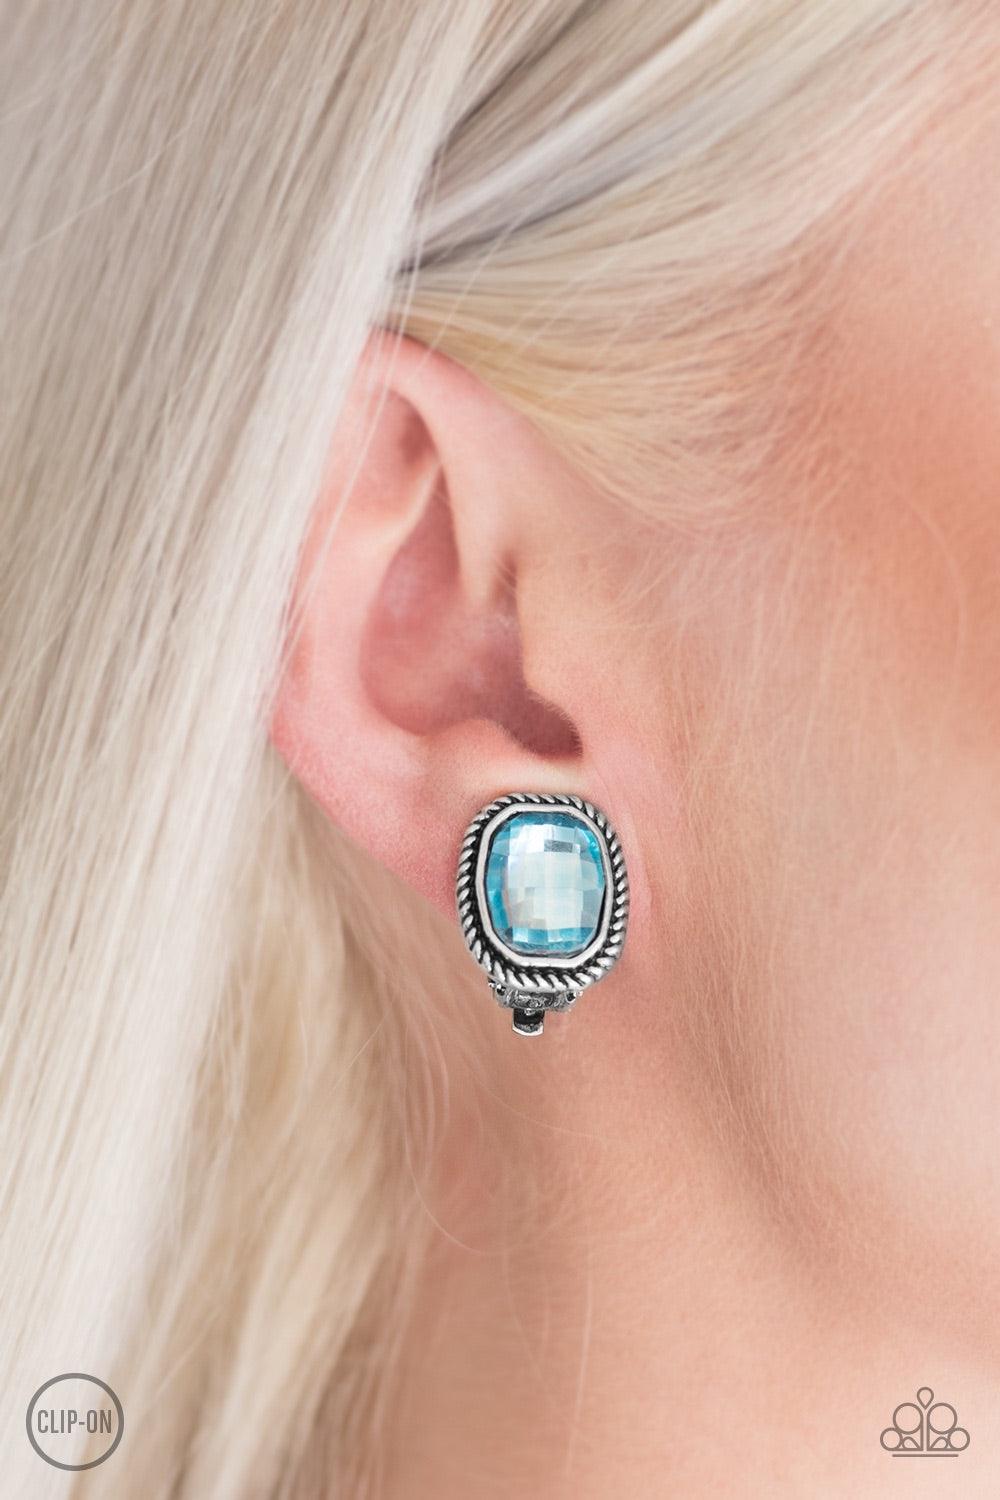 Paparazzi Accessories Beam Dream - Blue *Clip-On Faceted blue gems are pressed into textured silver frames for a refined look. Earring attaches to a standard clip-on fitting. Jewelry